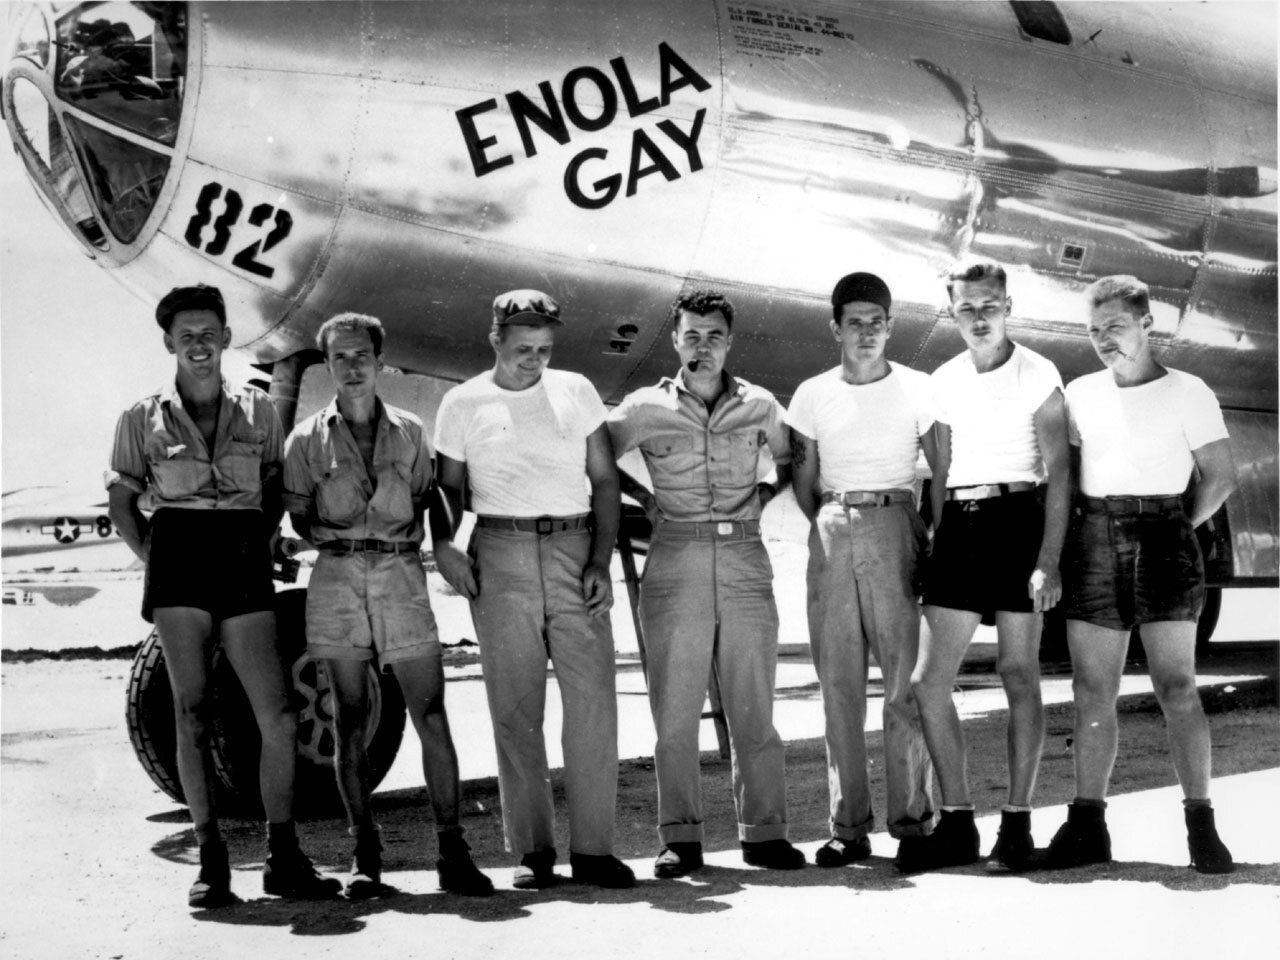 Enola Gay crew (incomplete) with thier B-29 bomber. They bombed Hiroshima